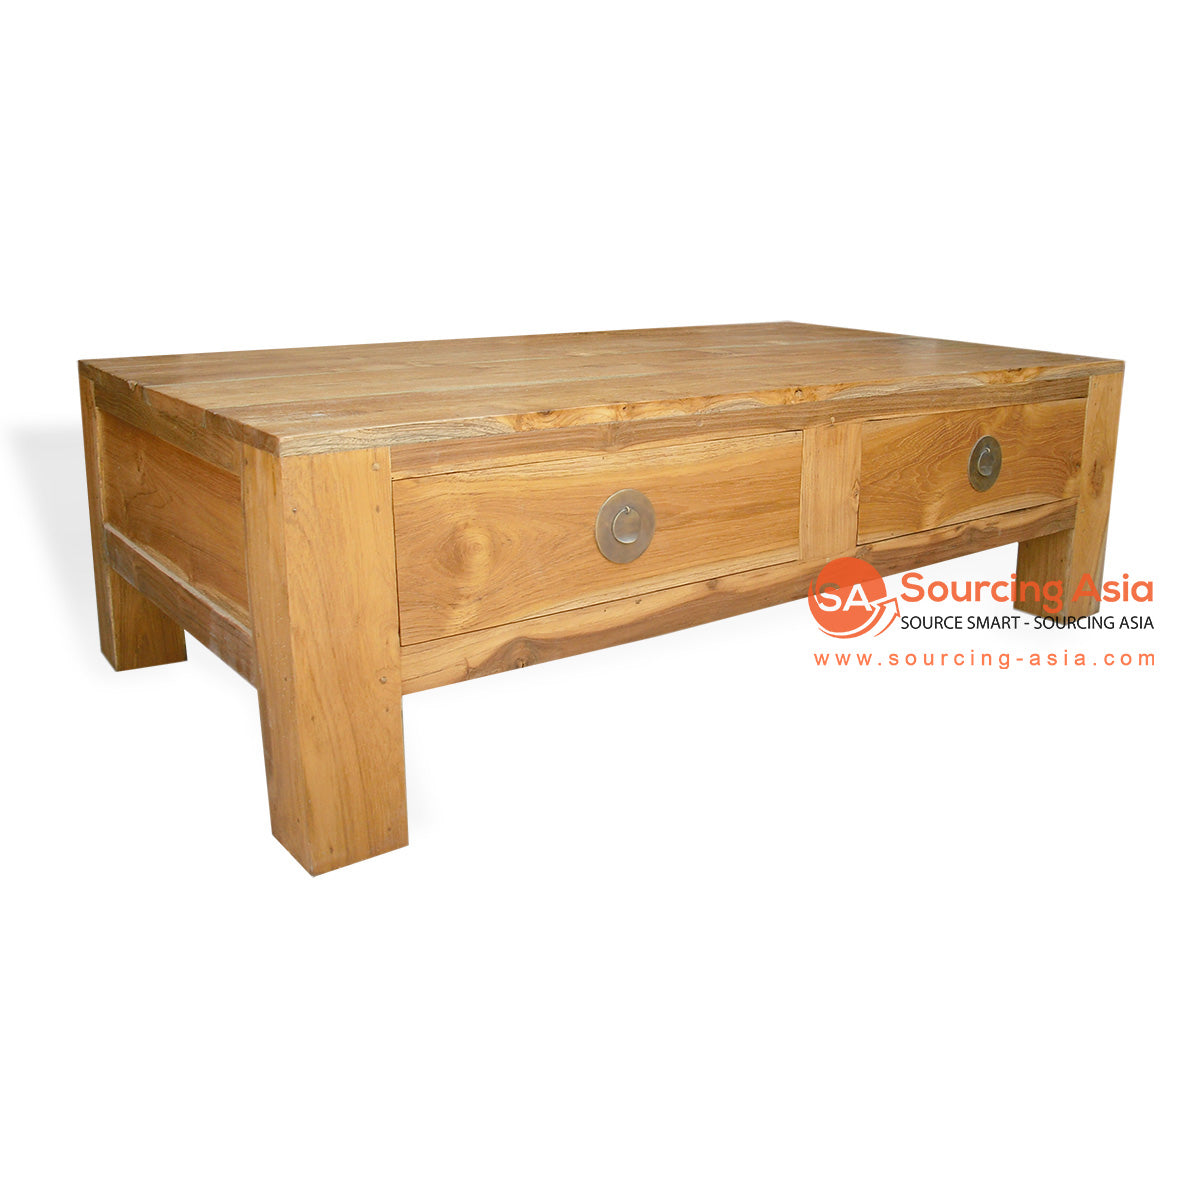 KYT60053 NATURAL RECYCLED TEAK WOOD FOUR DRAWERS SHANGI COFFEE TABLE